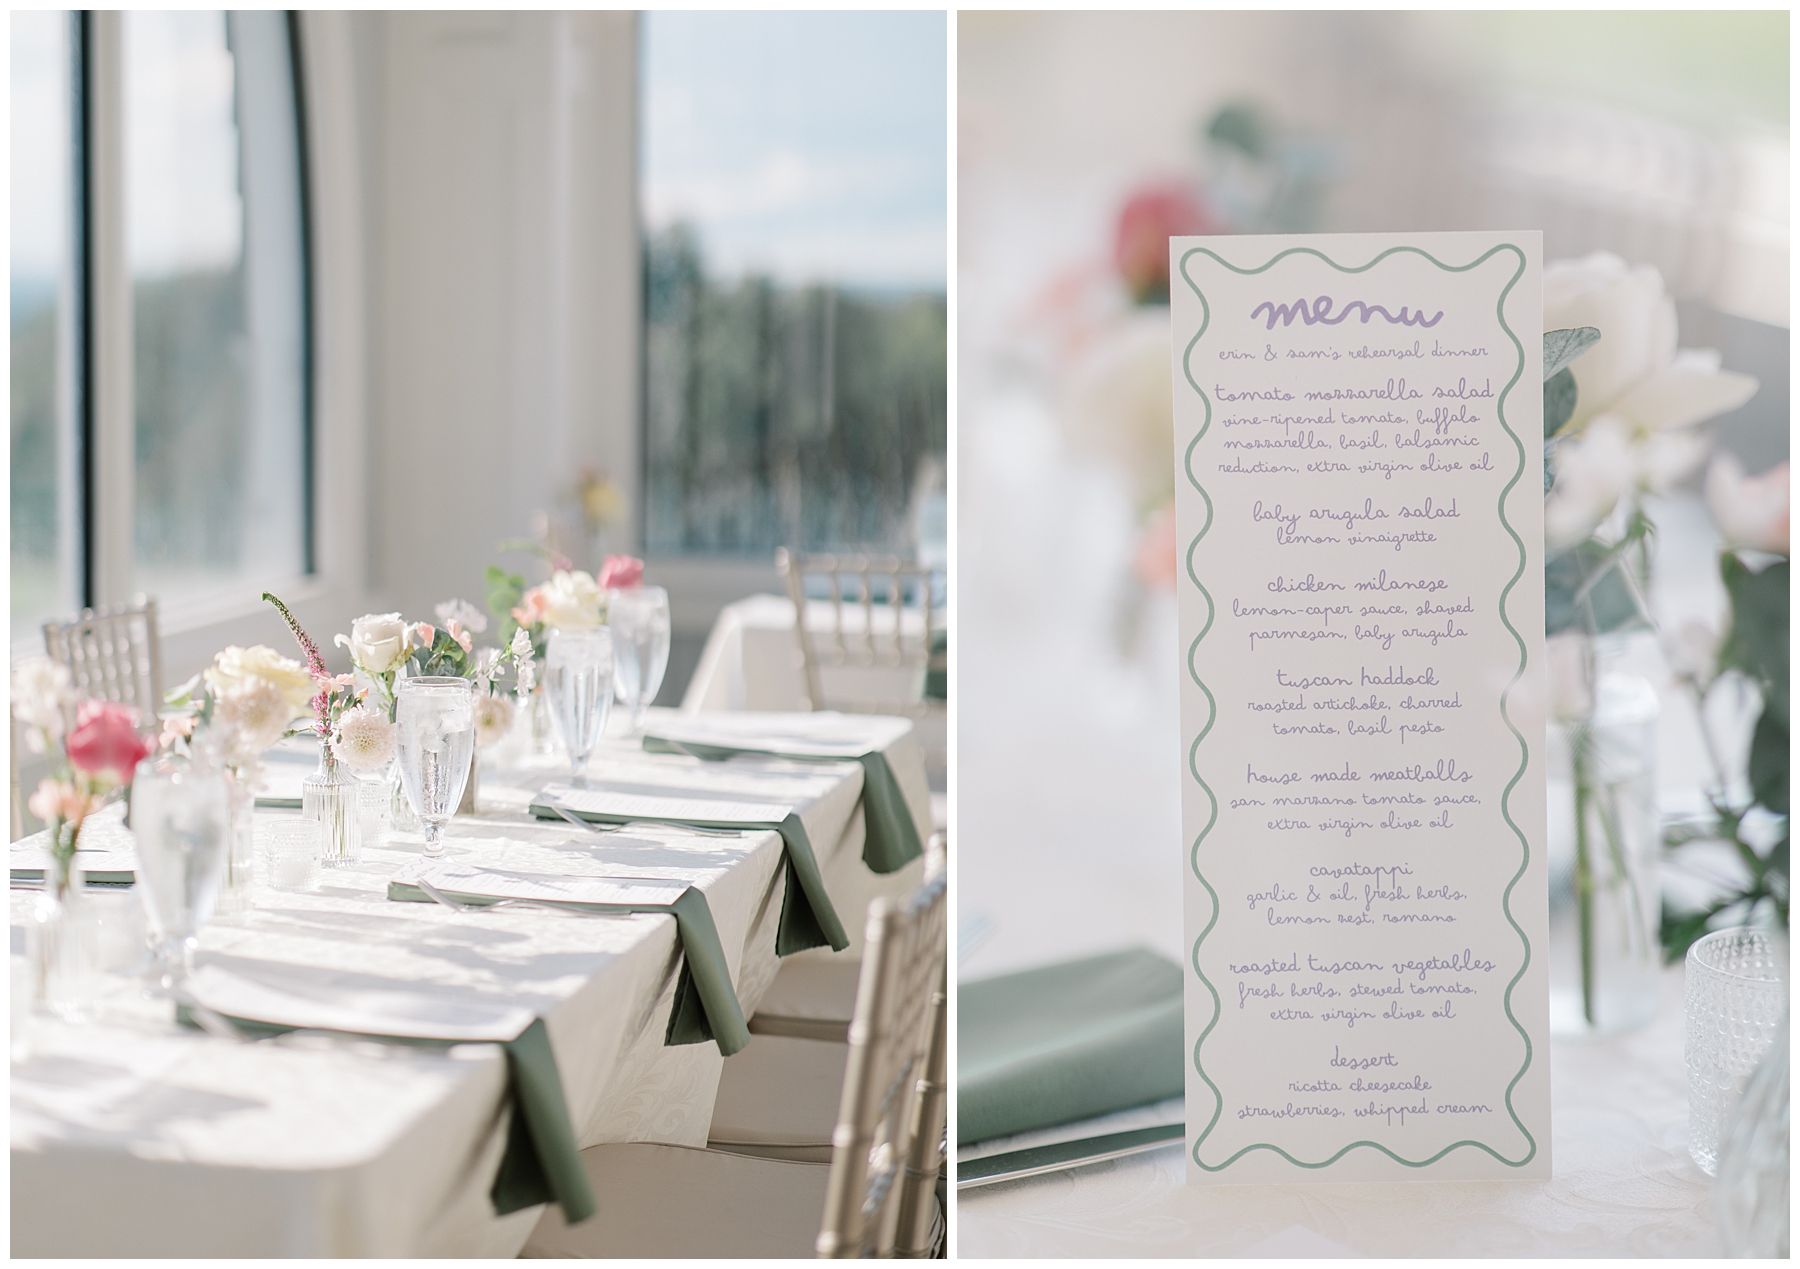 menus and details from rehearsal dinner